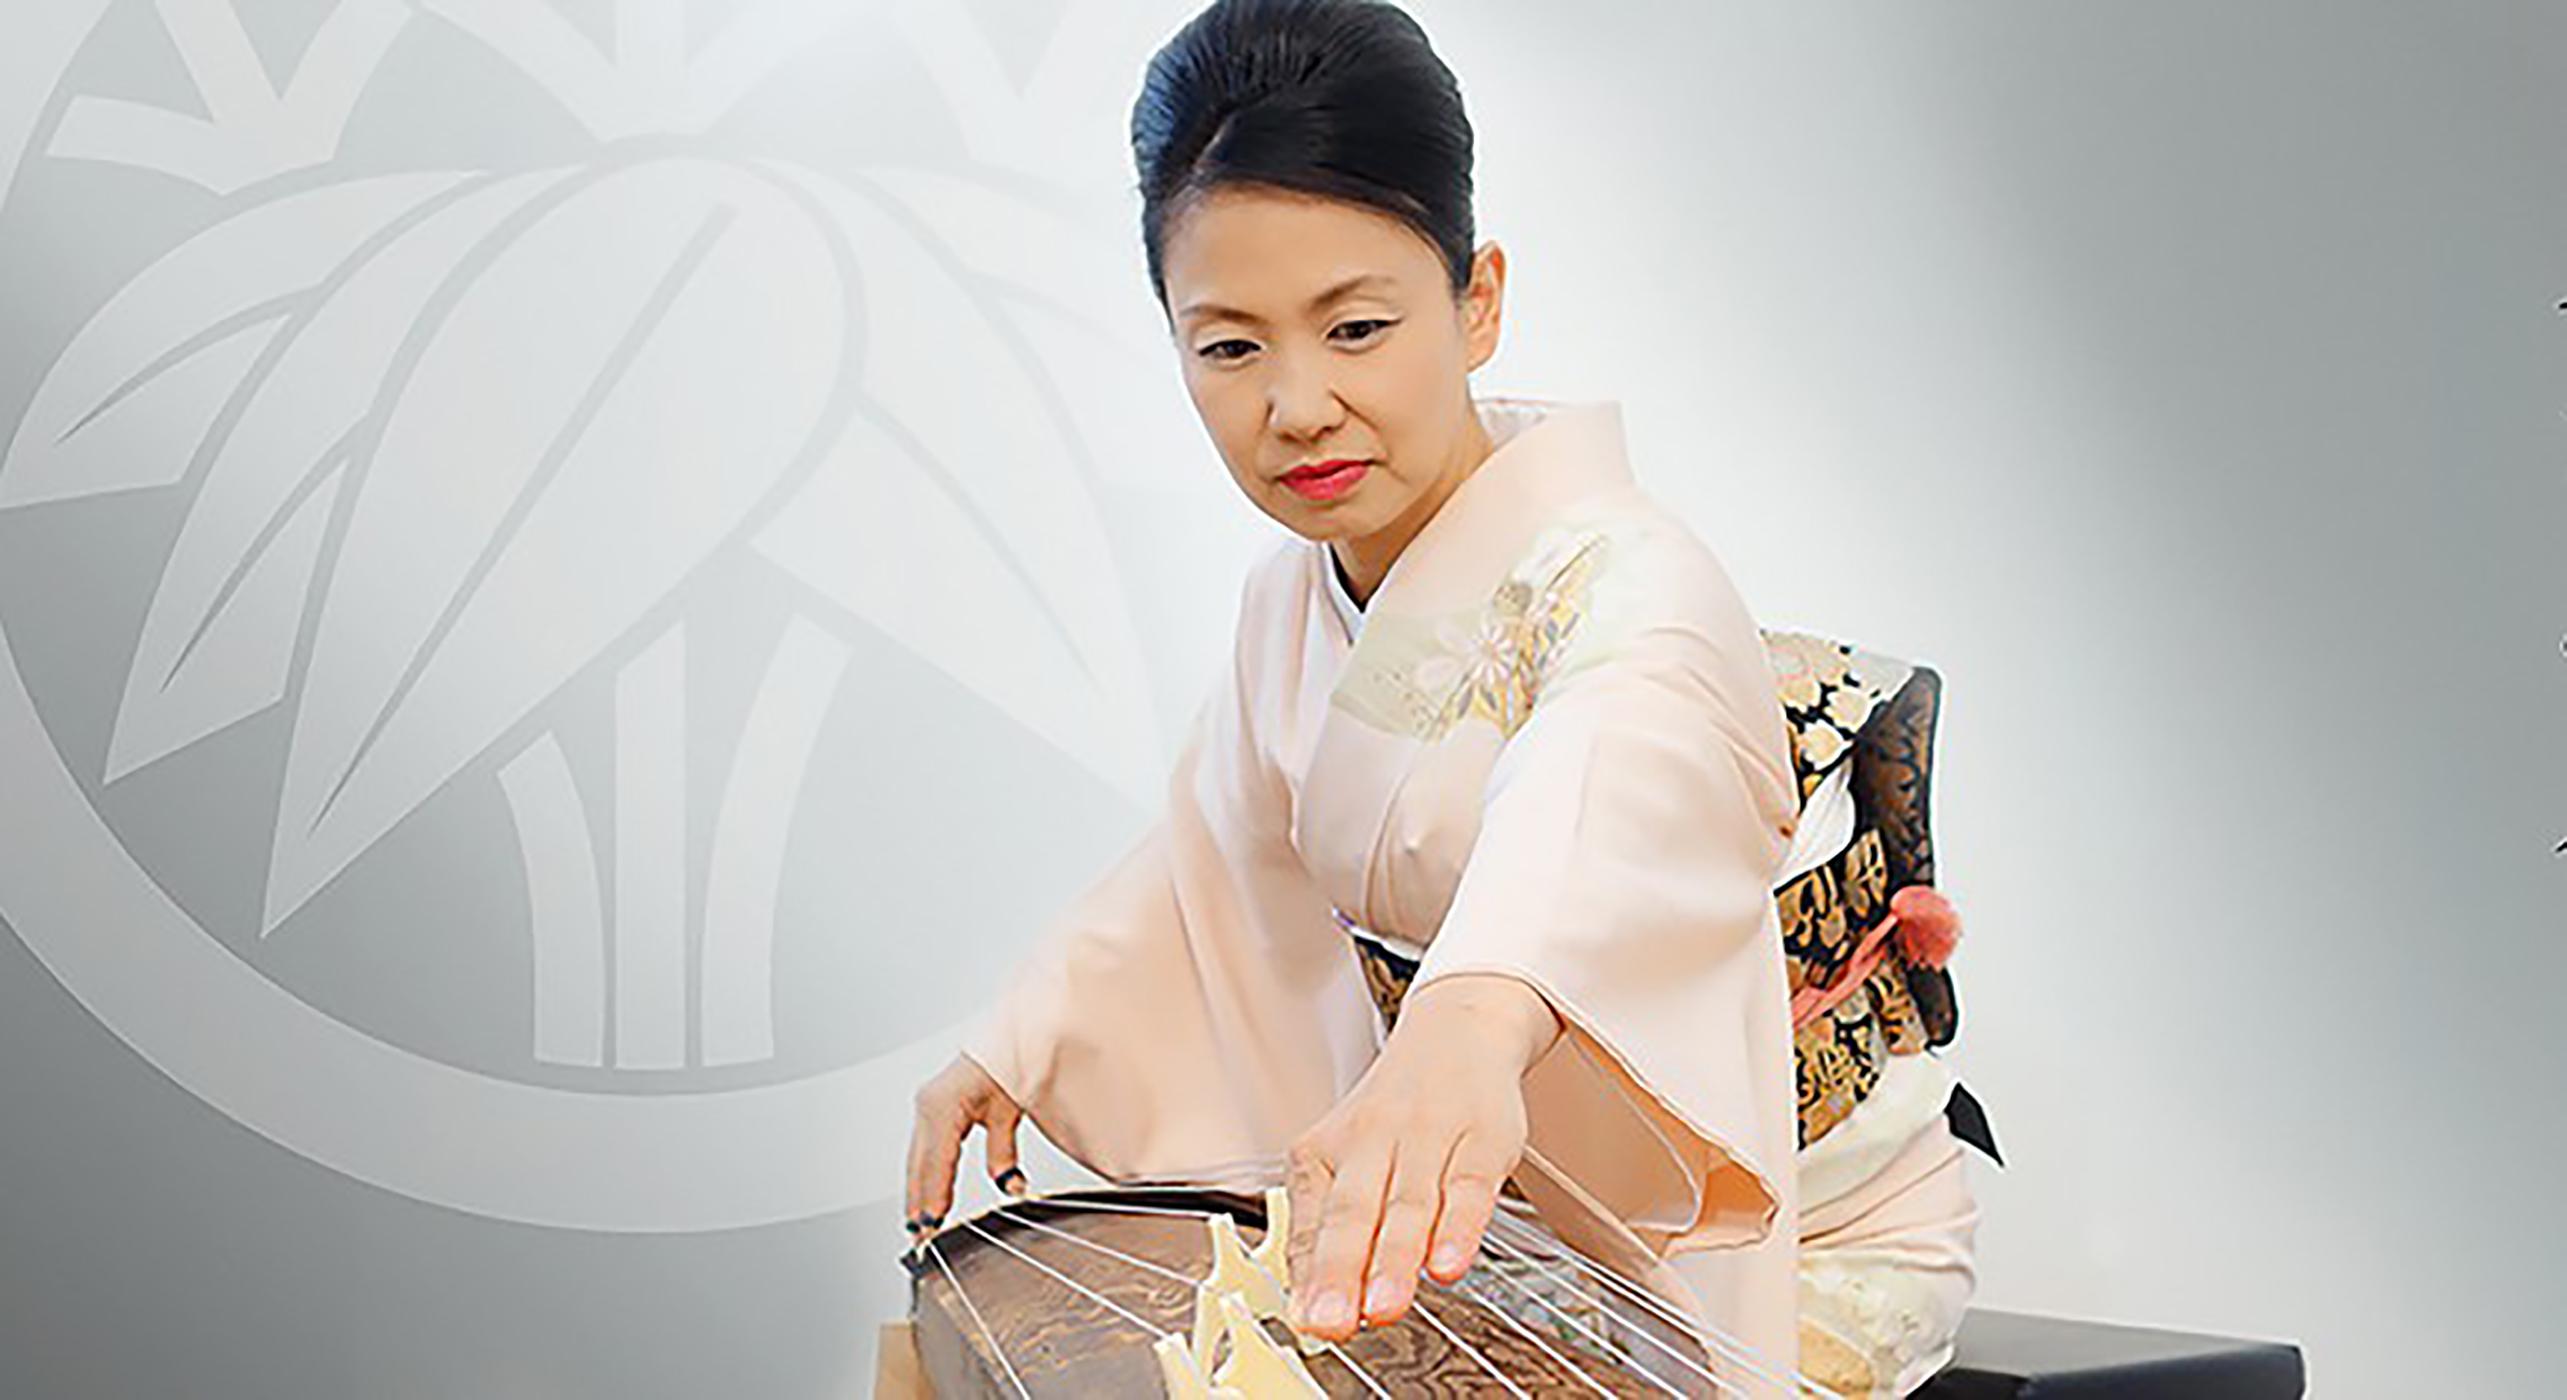 Masayo Ishigure plays a traditional Japanese horizontal harp or zither known as the koto